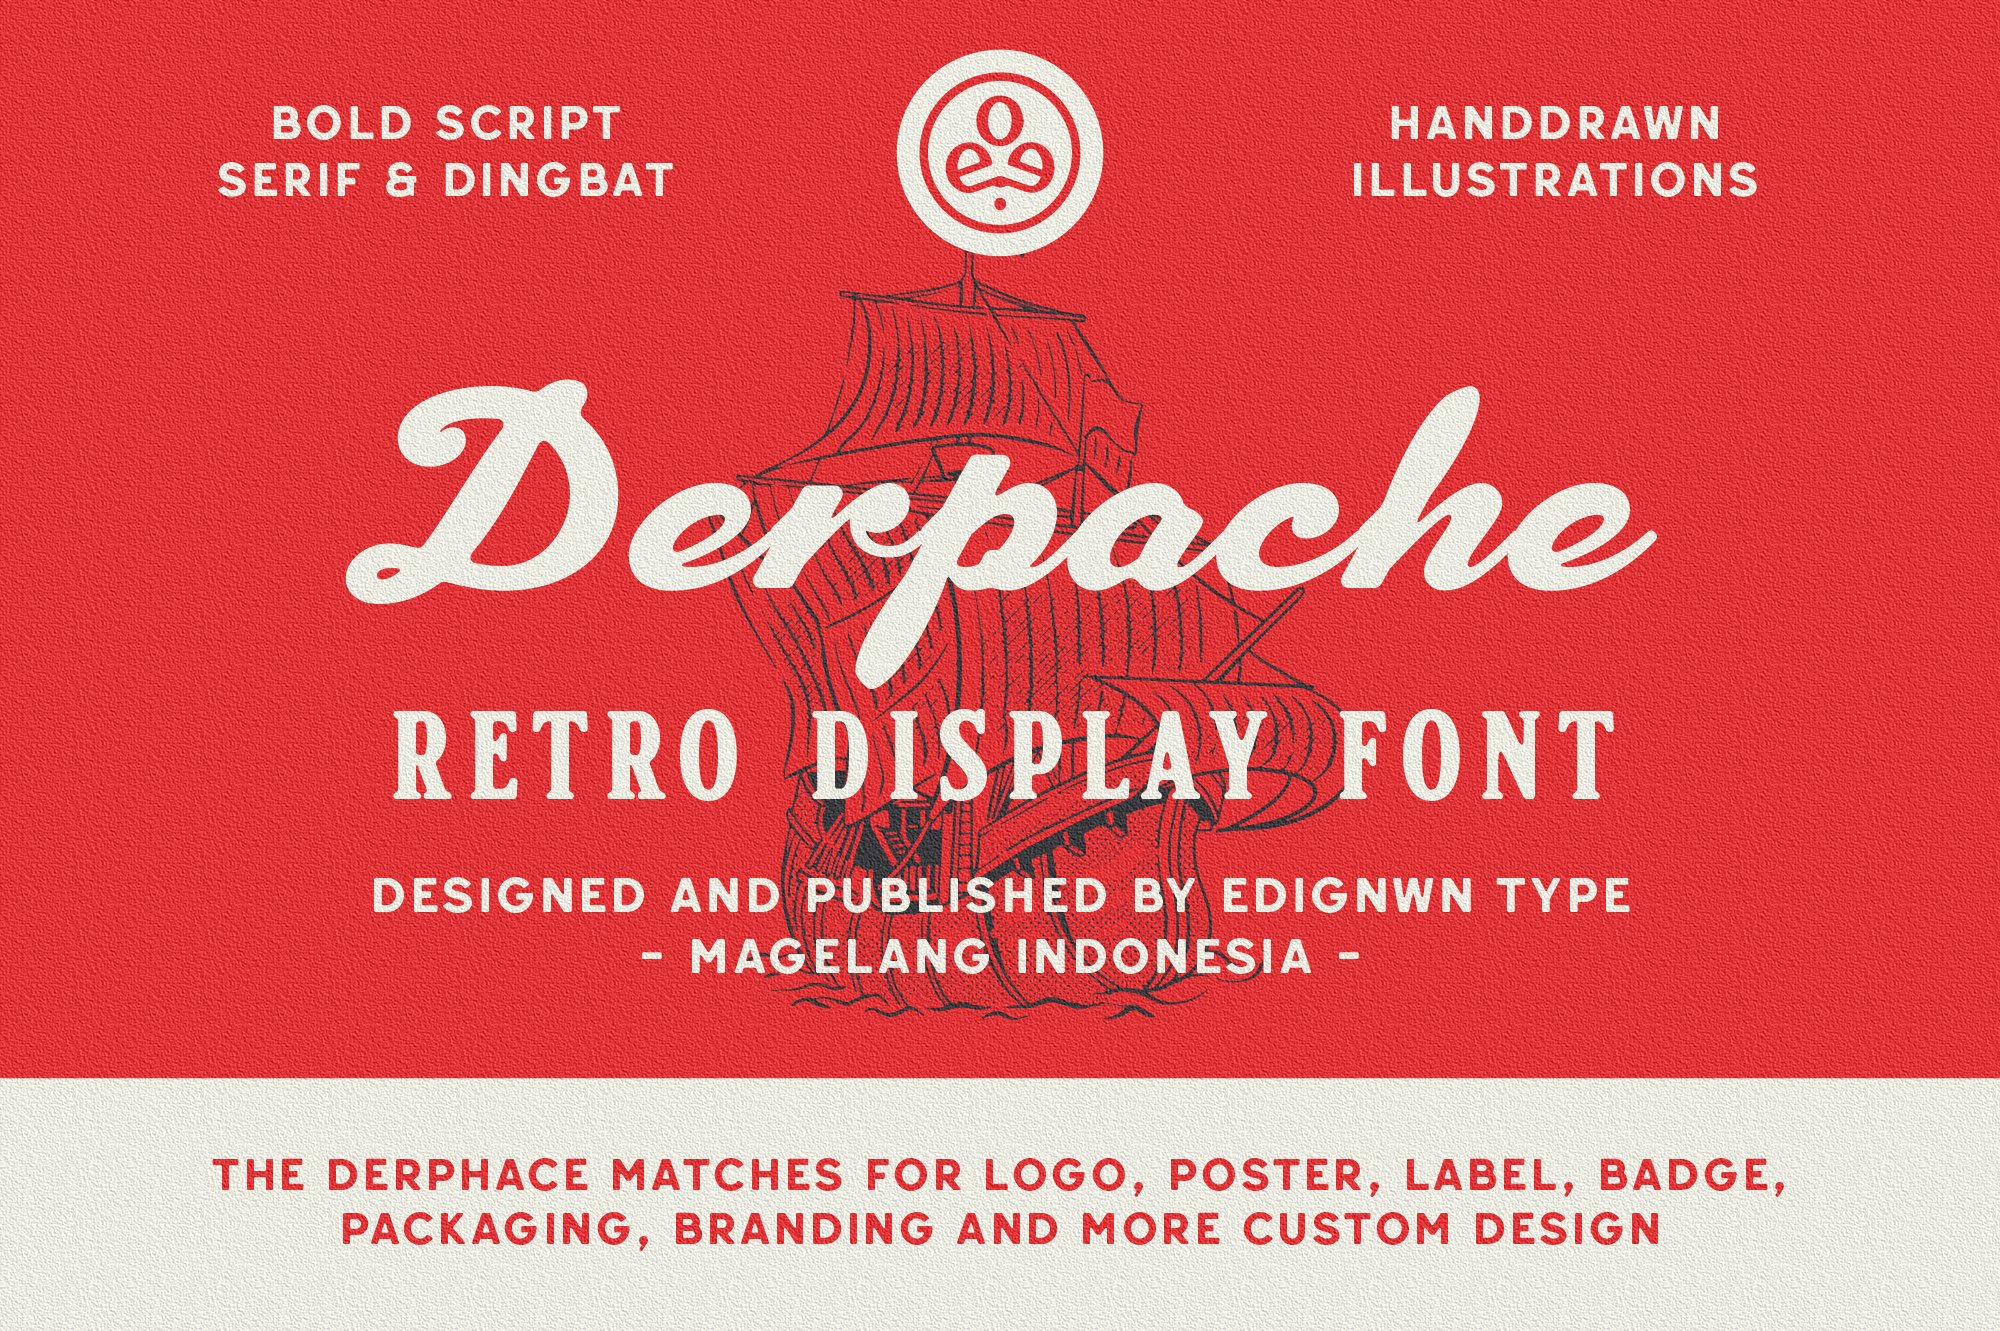 Derpache - Retro Display Font cover image.